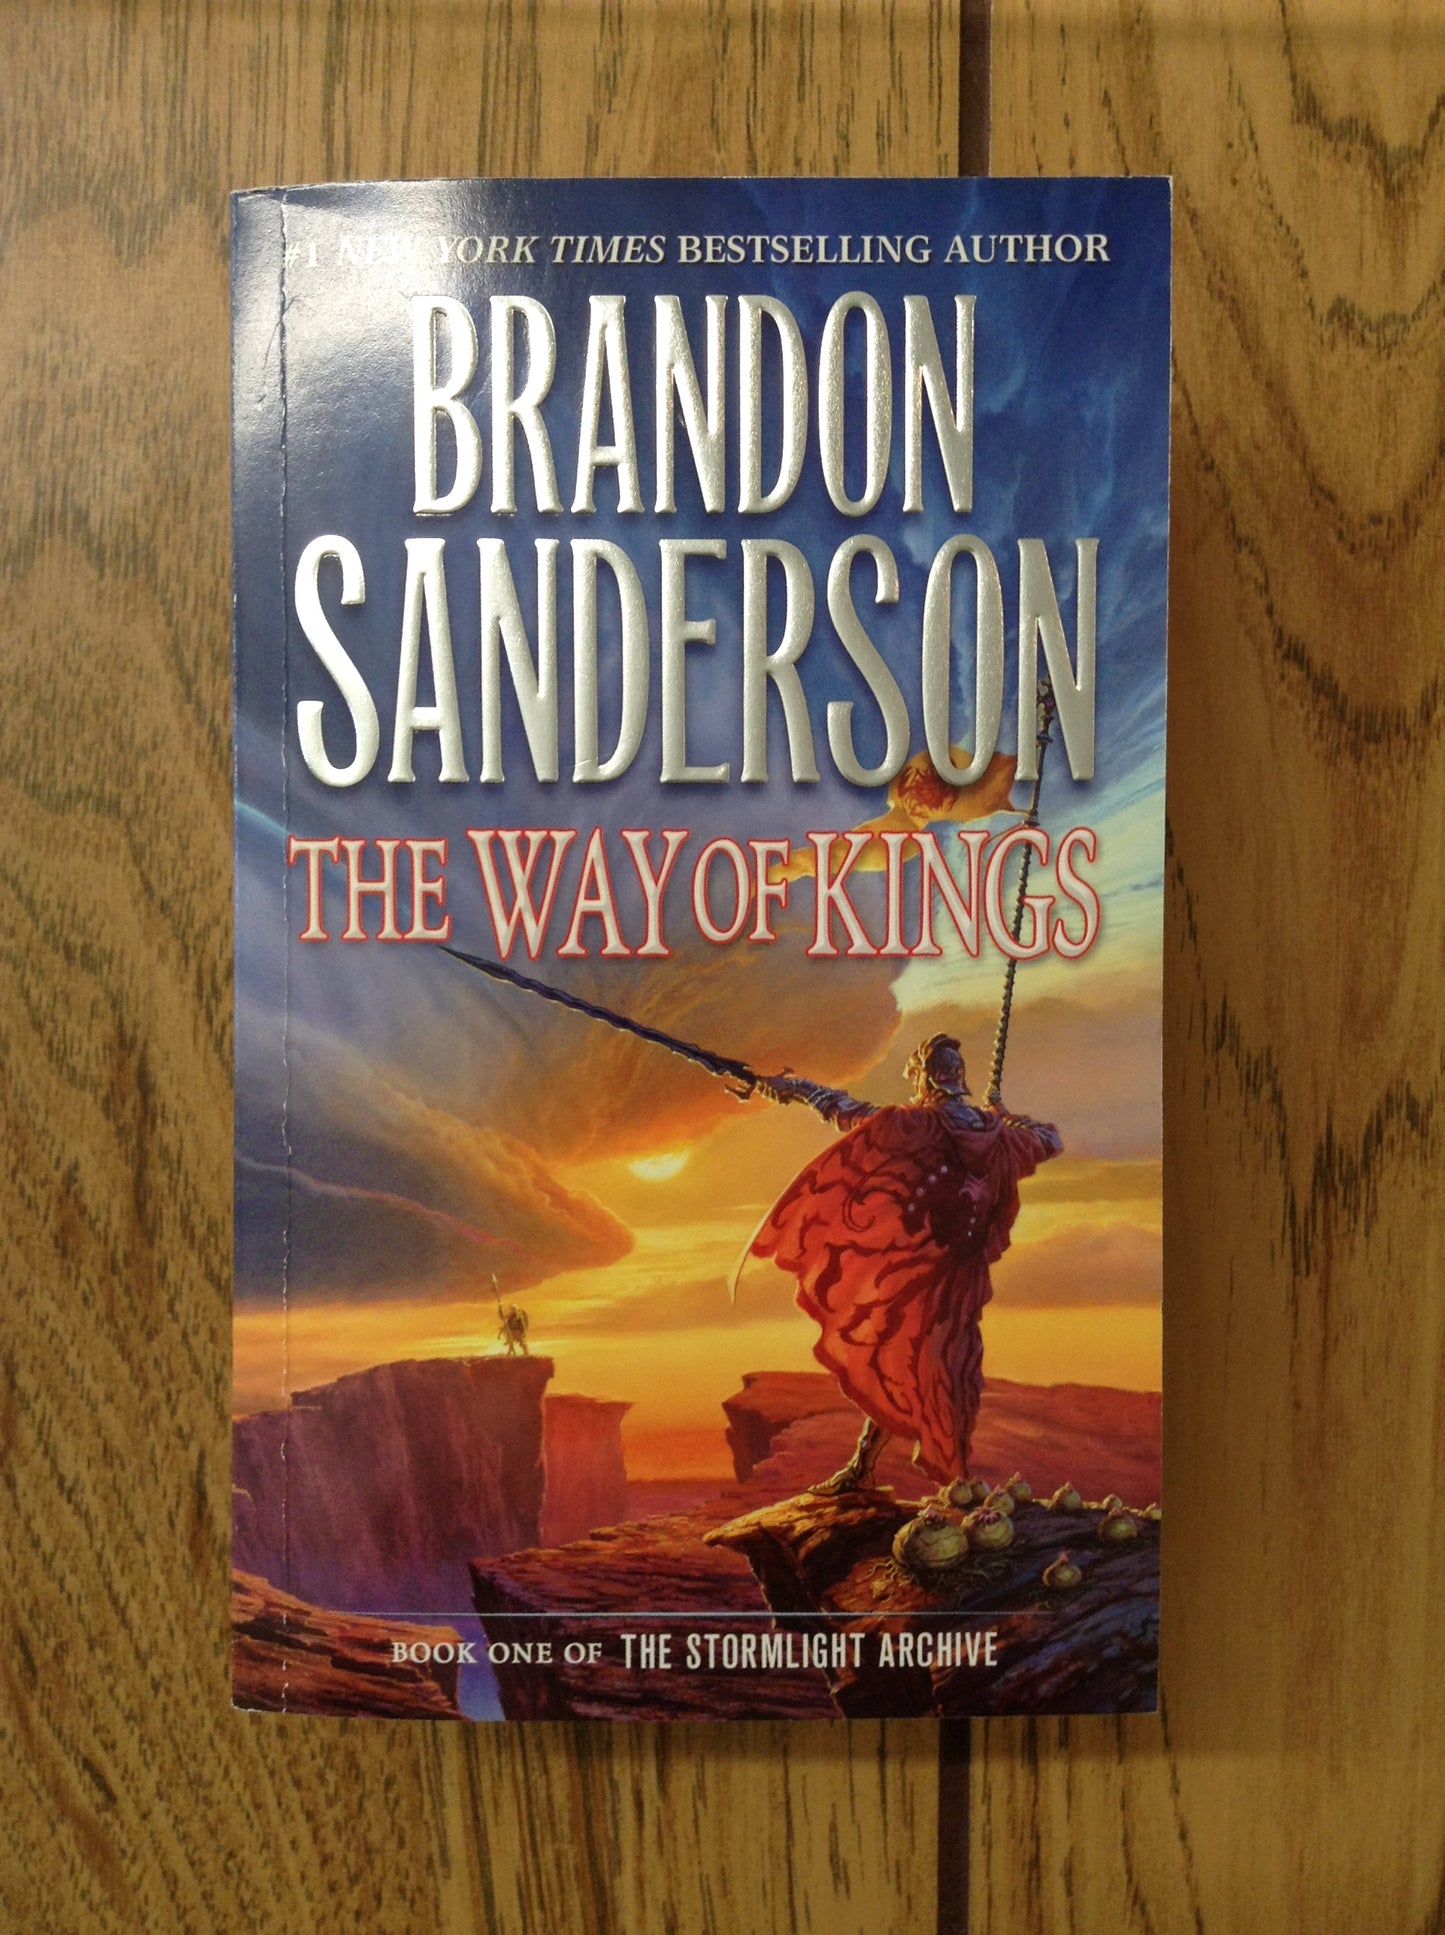 The Way of Kings (The Stormlight Archive #1)